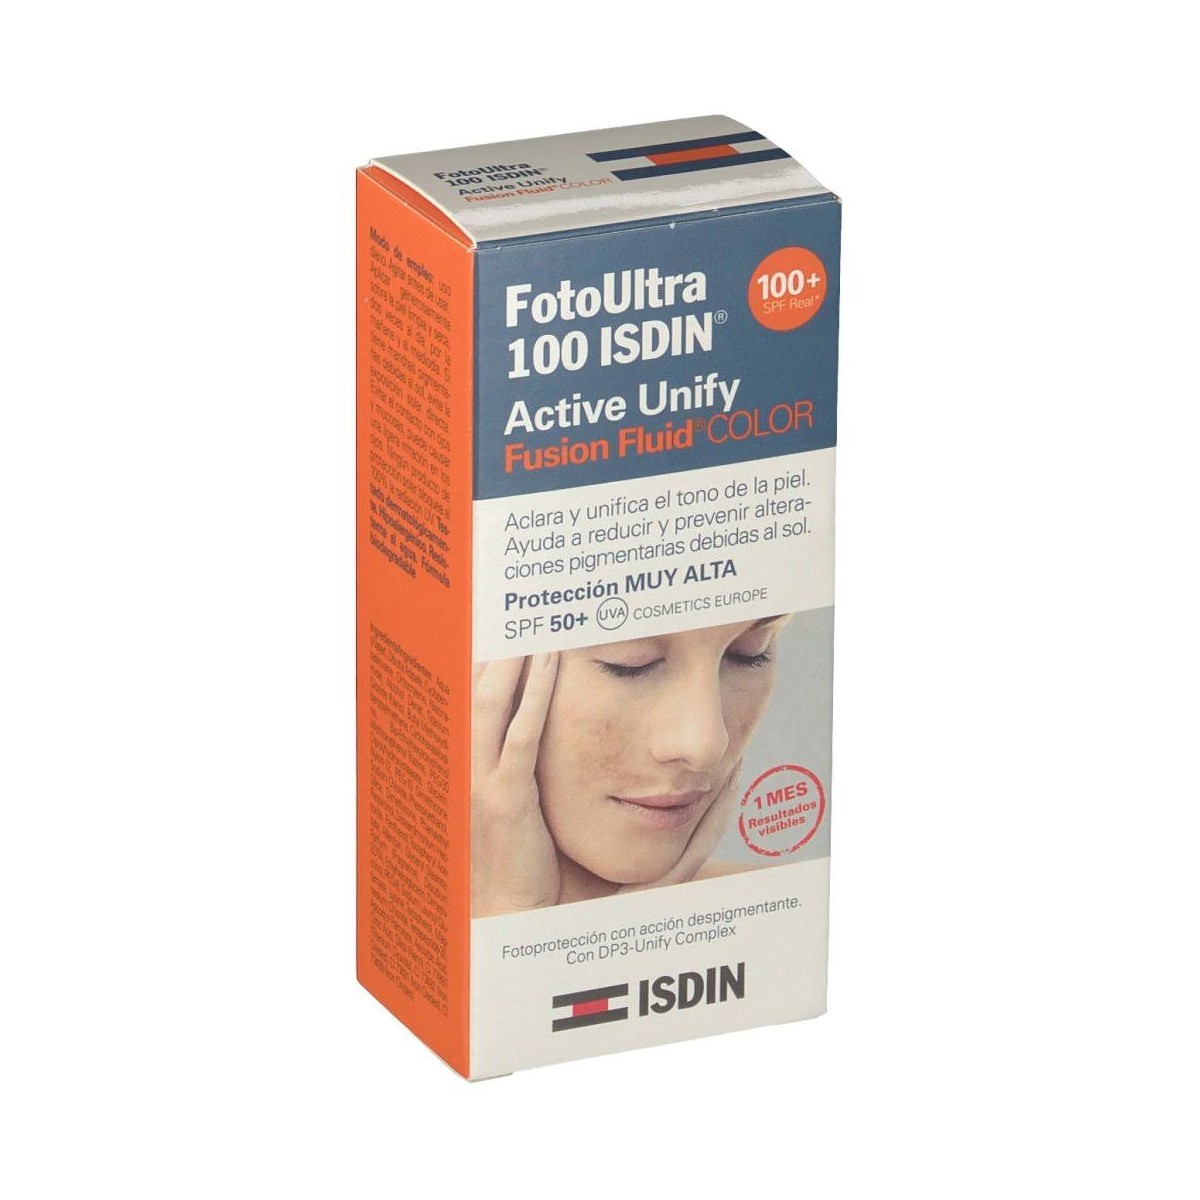 isdin-fotoultra-100-active-unify-fusion-fluid-color-50-ml